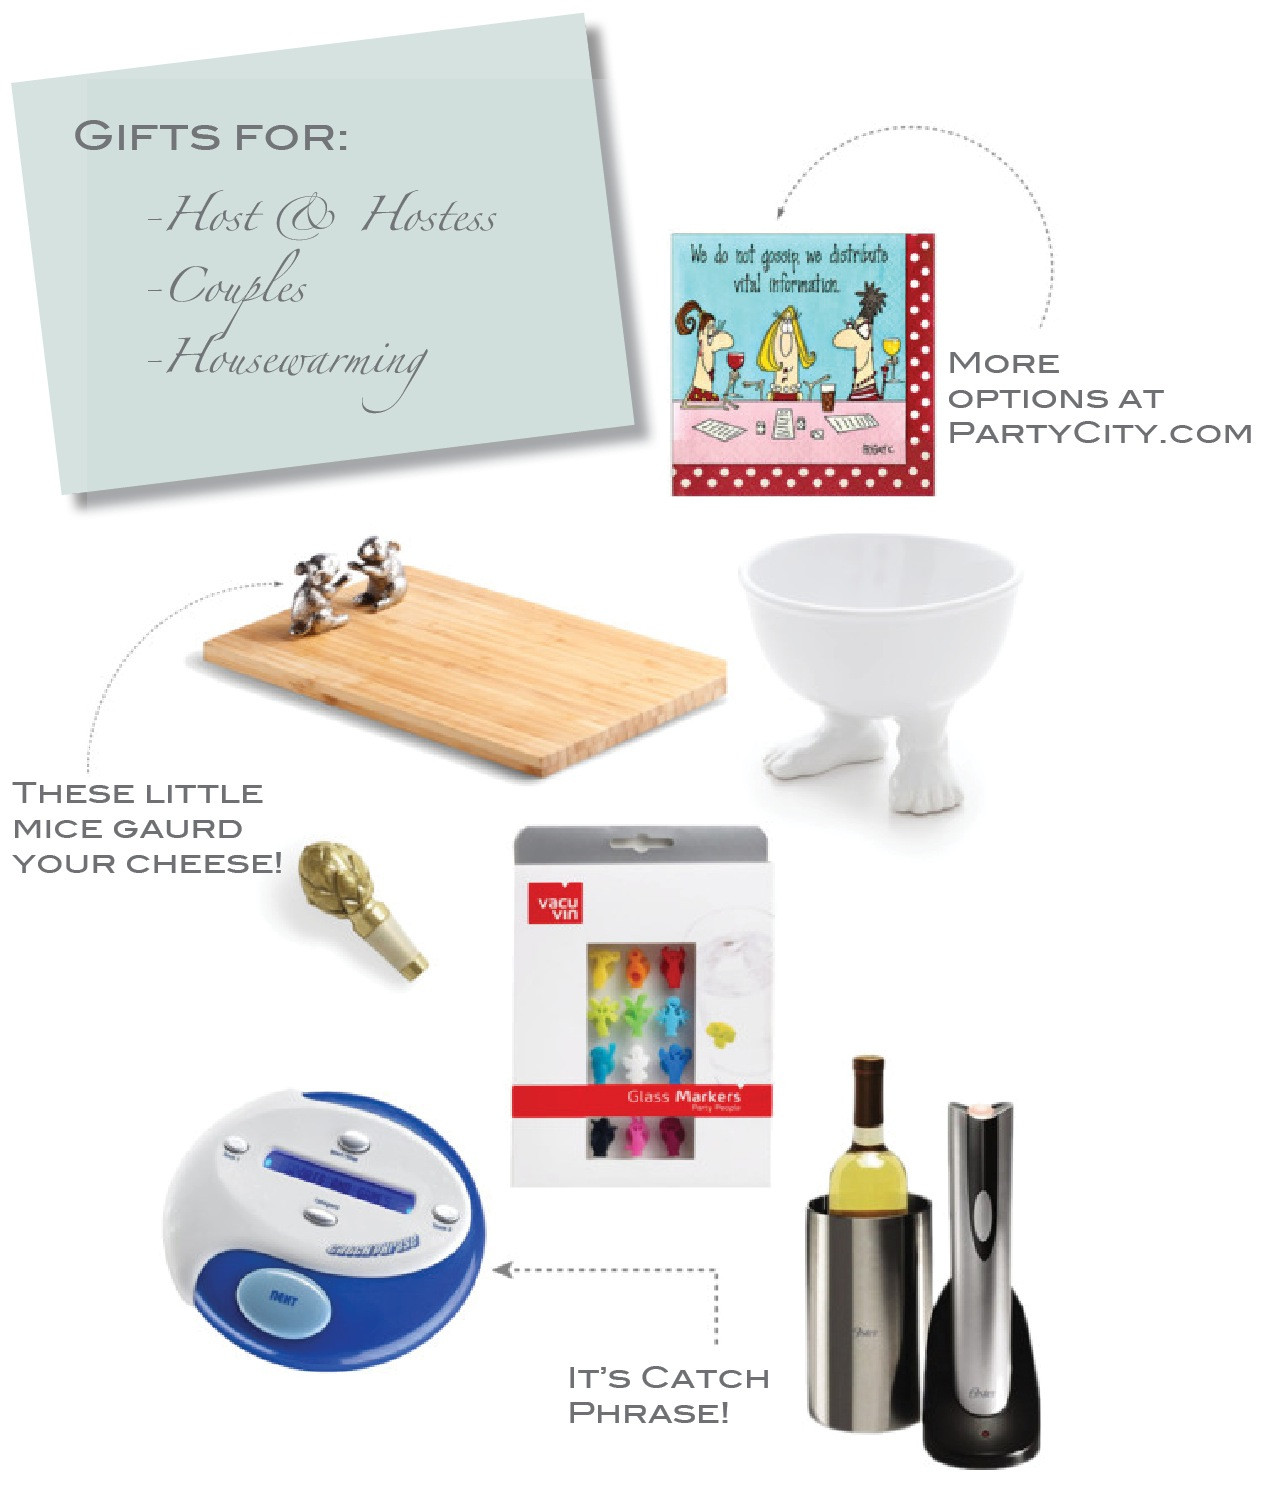 Host Gift Ideas For Couples
 2012 Holiday Gift Guide 2 Hostess Housewarming Couple